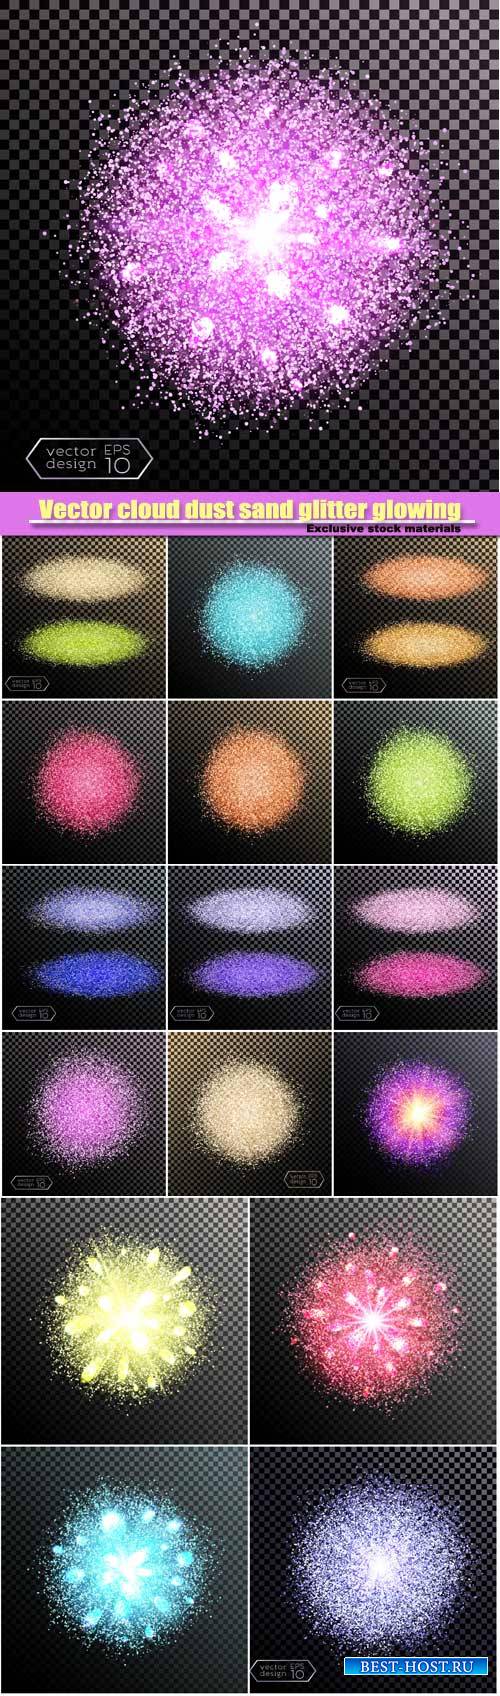 Vector cloud dust sand glitter glowing bright isolated design element